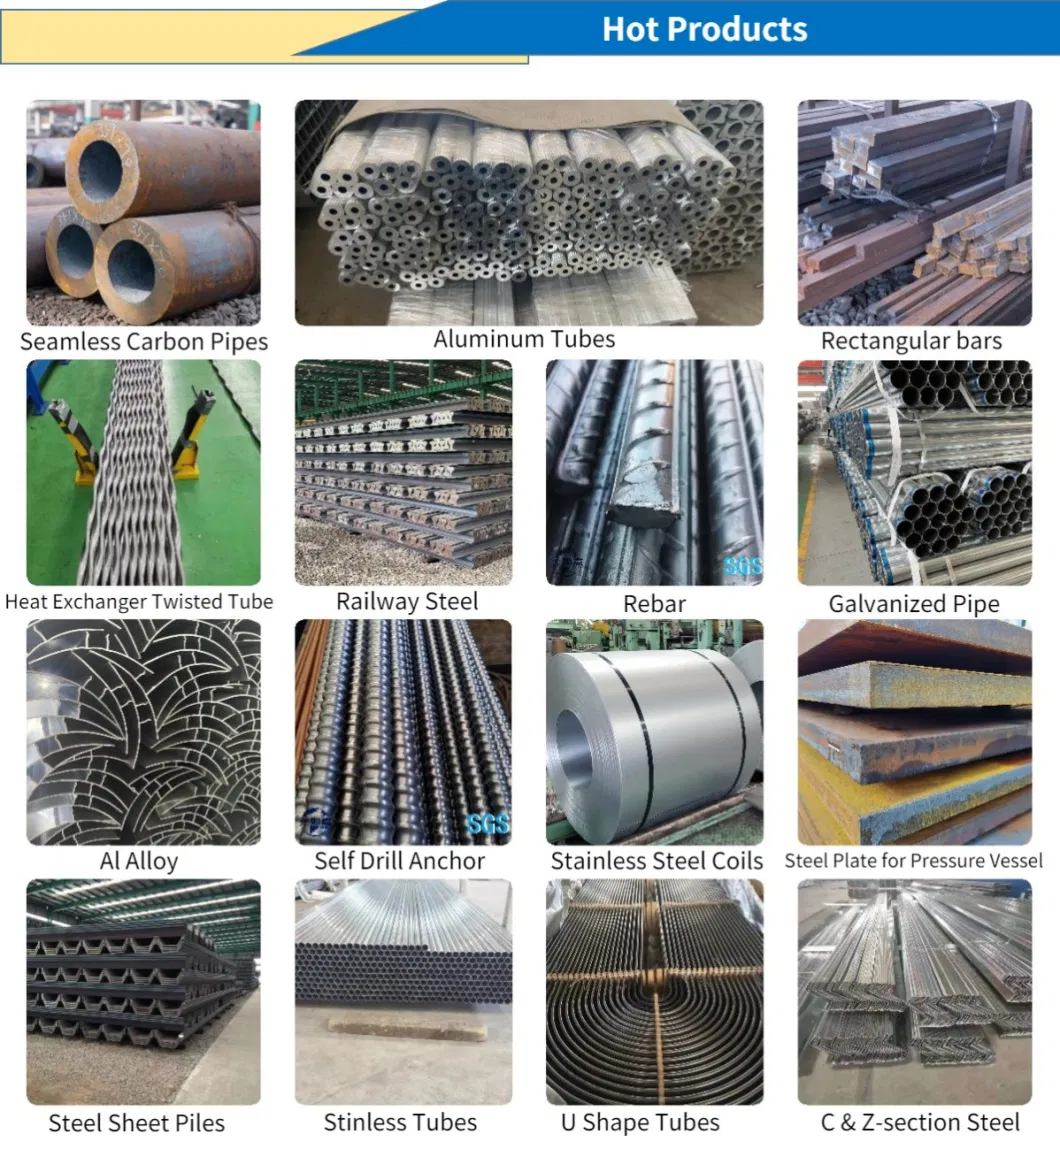 Hot Rolled Forged Steel Ss400 Round Bar SAE 1045 4140 4340 8620 8640 Alloy Steel Round Bars 3Cr2Mo Steel Rods 4Cr13 Steel Bars 15ni3mn Steel Rods